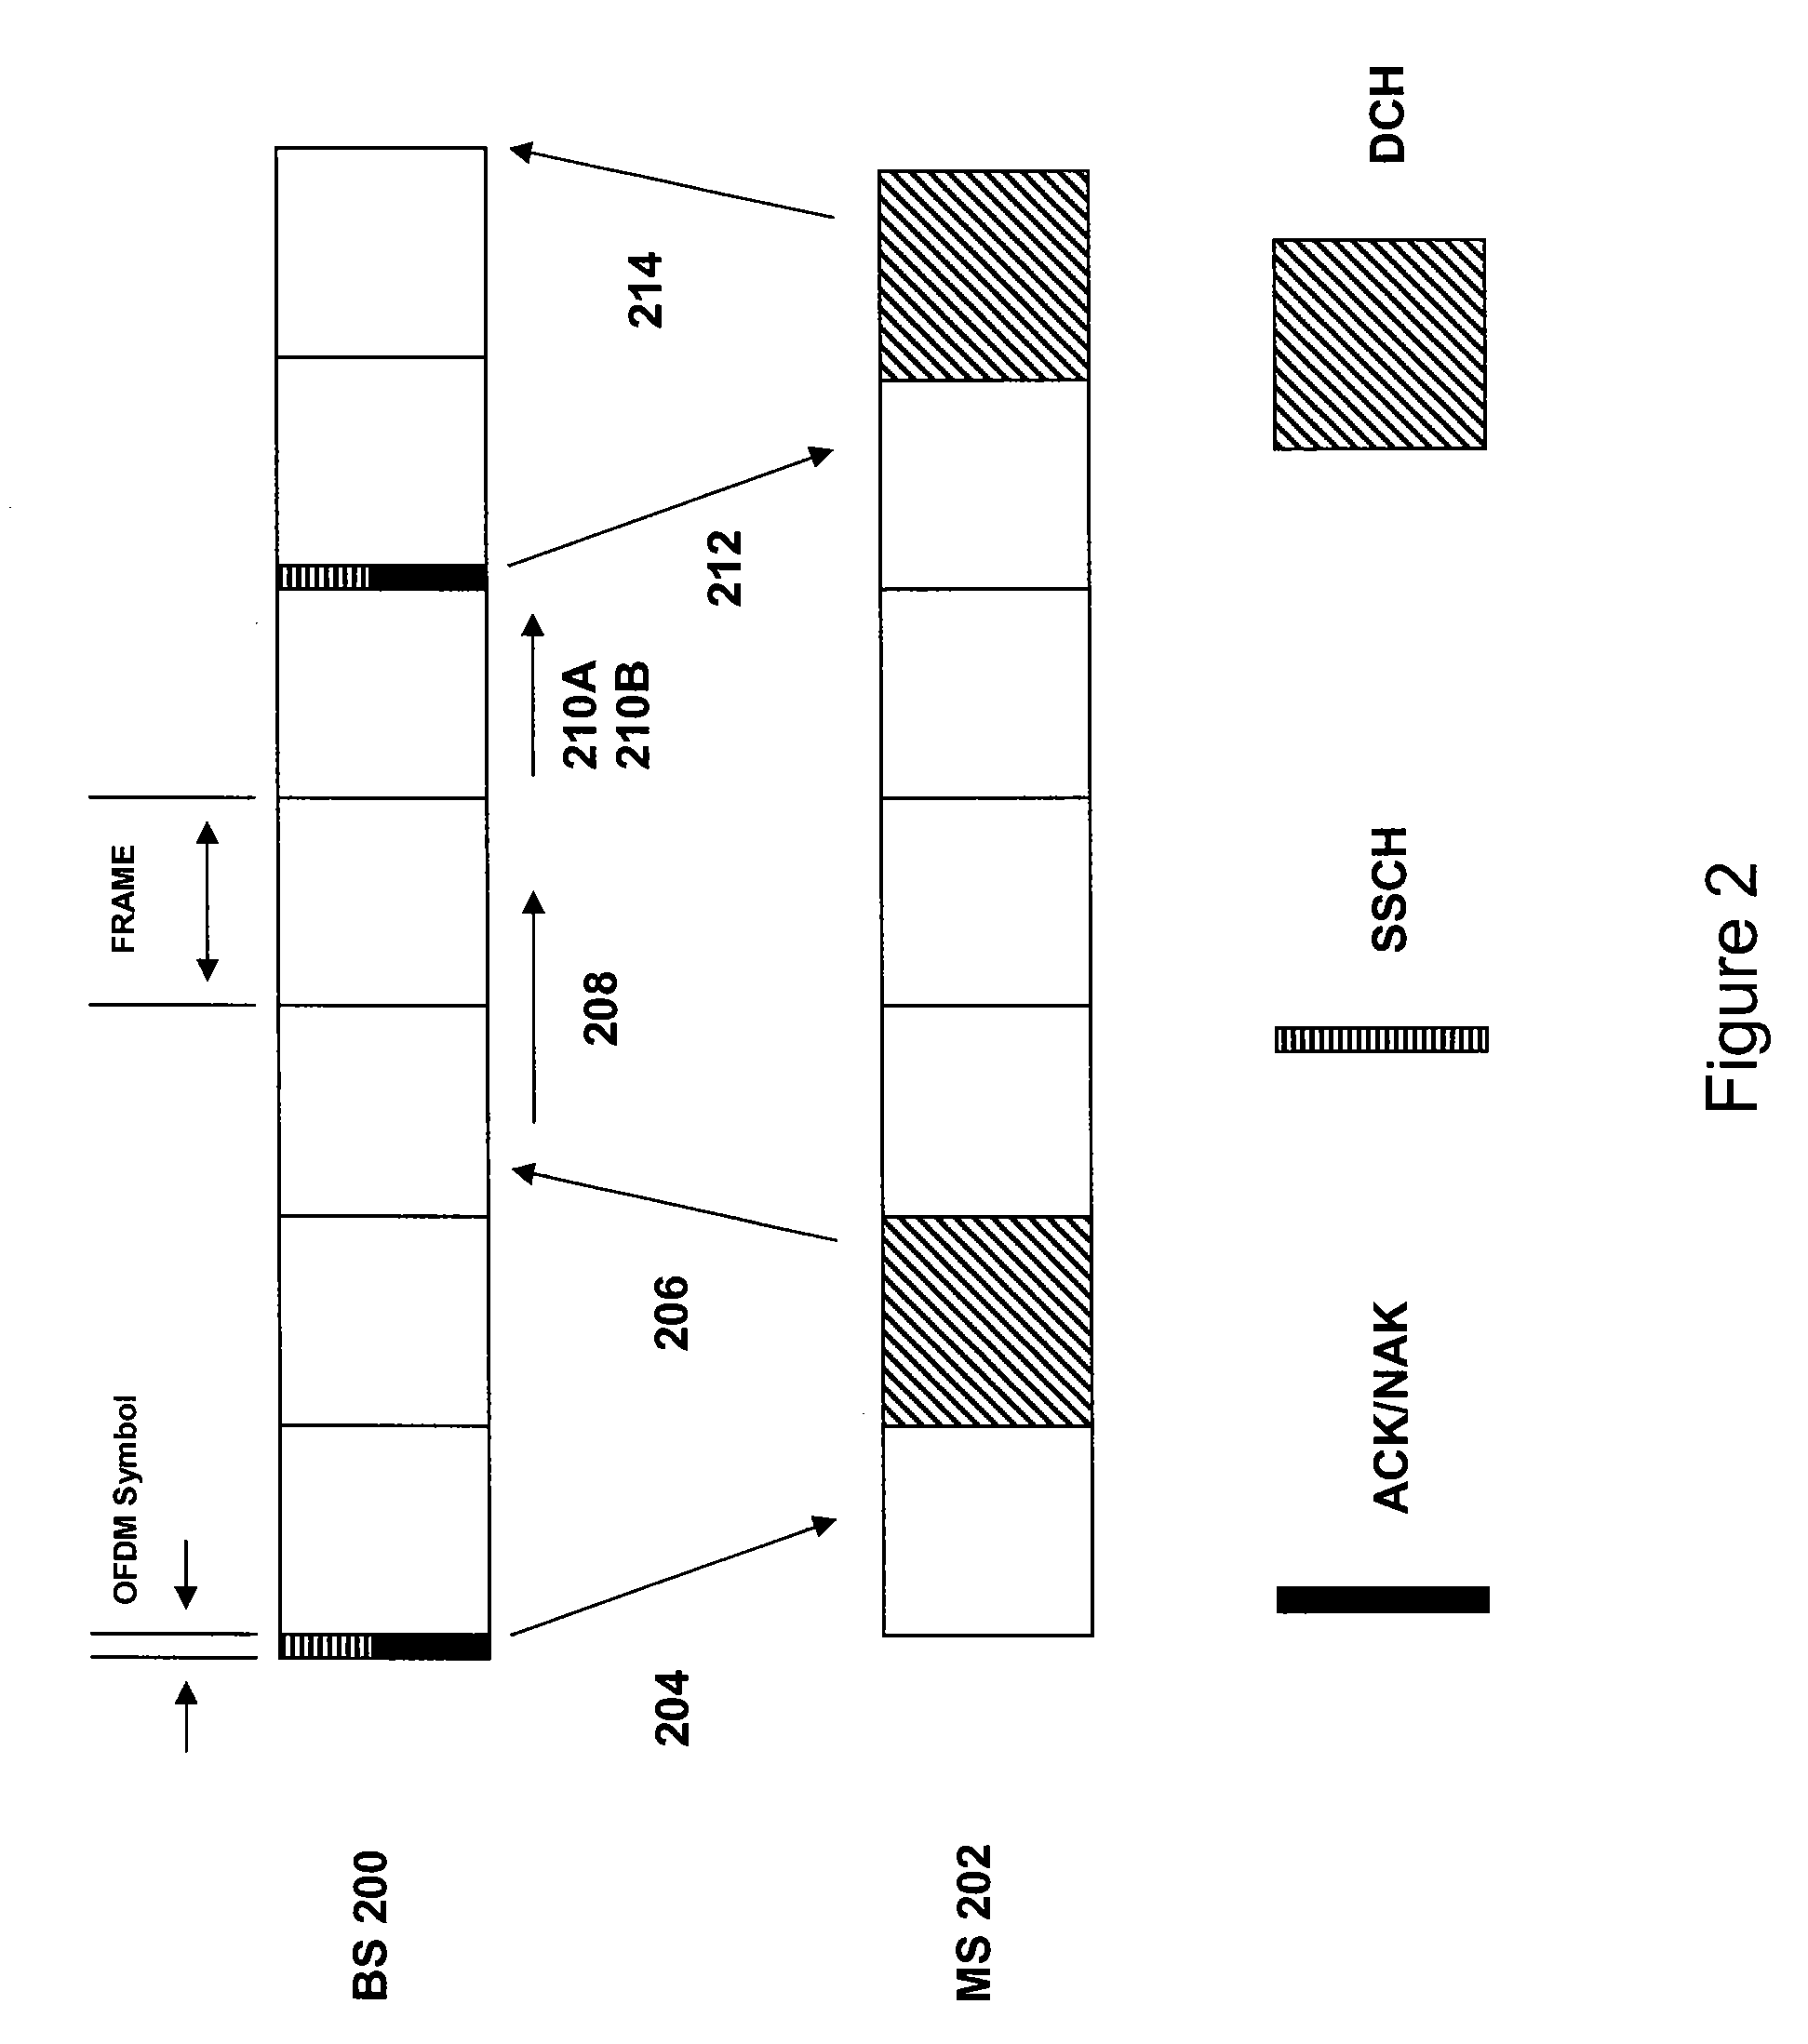 Adaptive HARQ in an ofdma based communication system